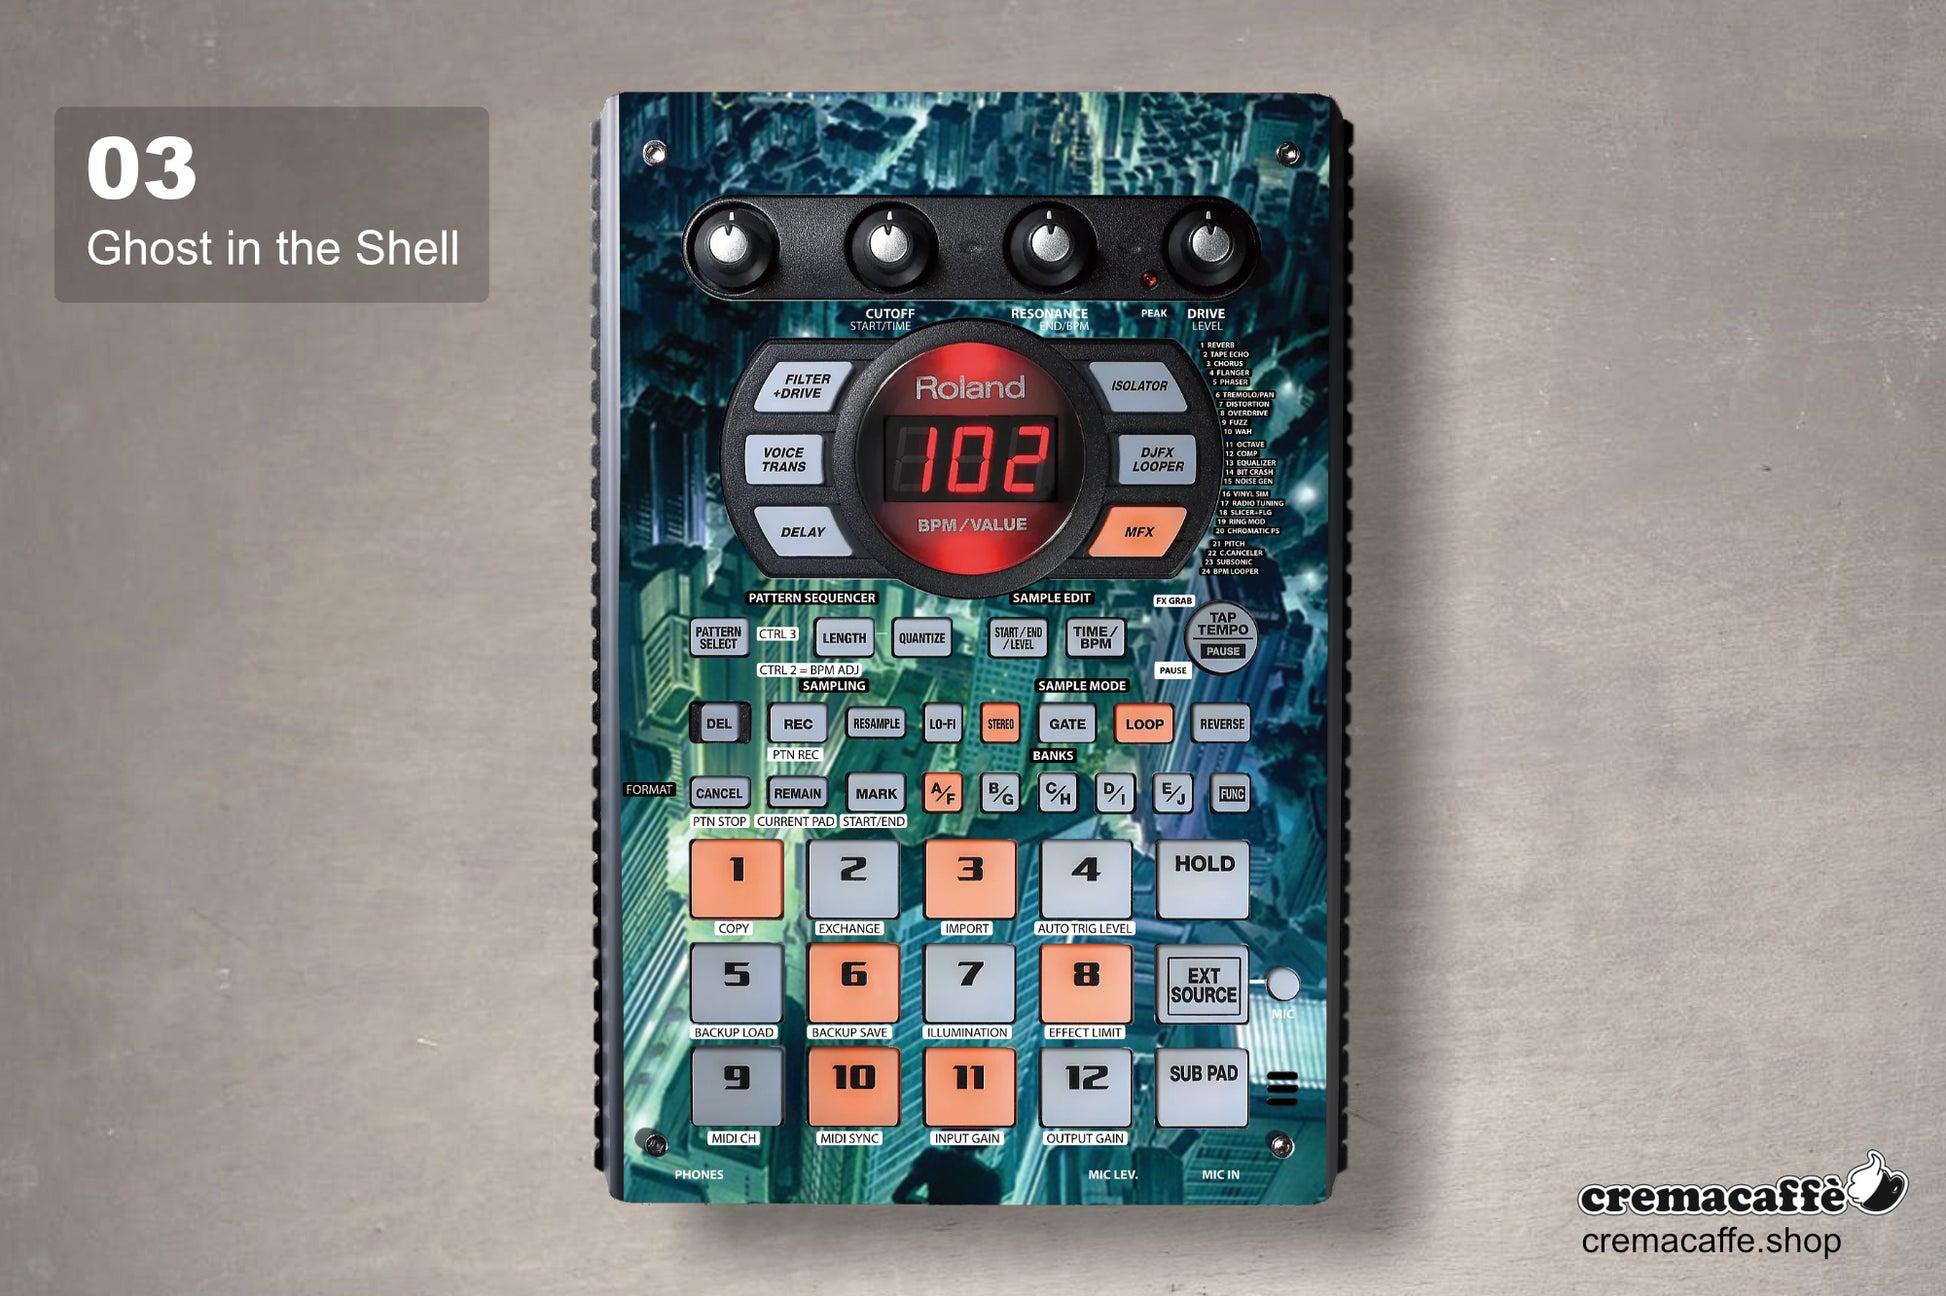 SP-404 SX Skin - Ghost in the Shell | Cremacaffe Design